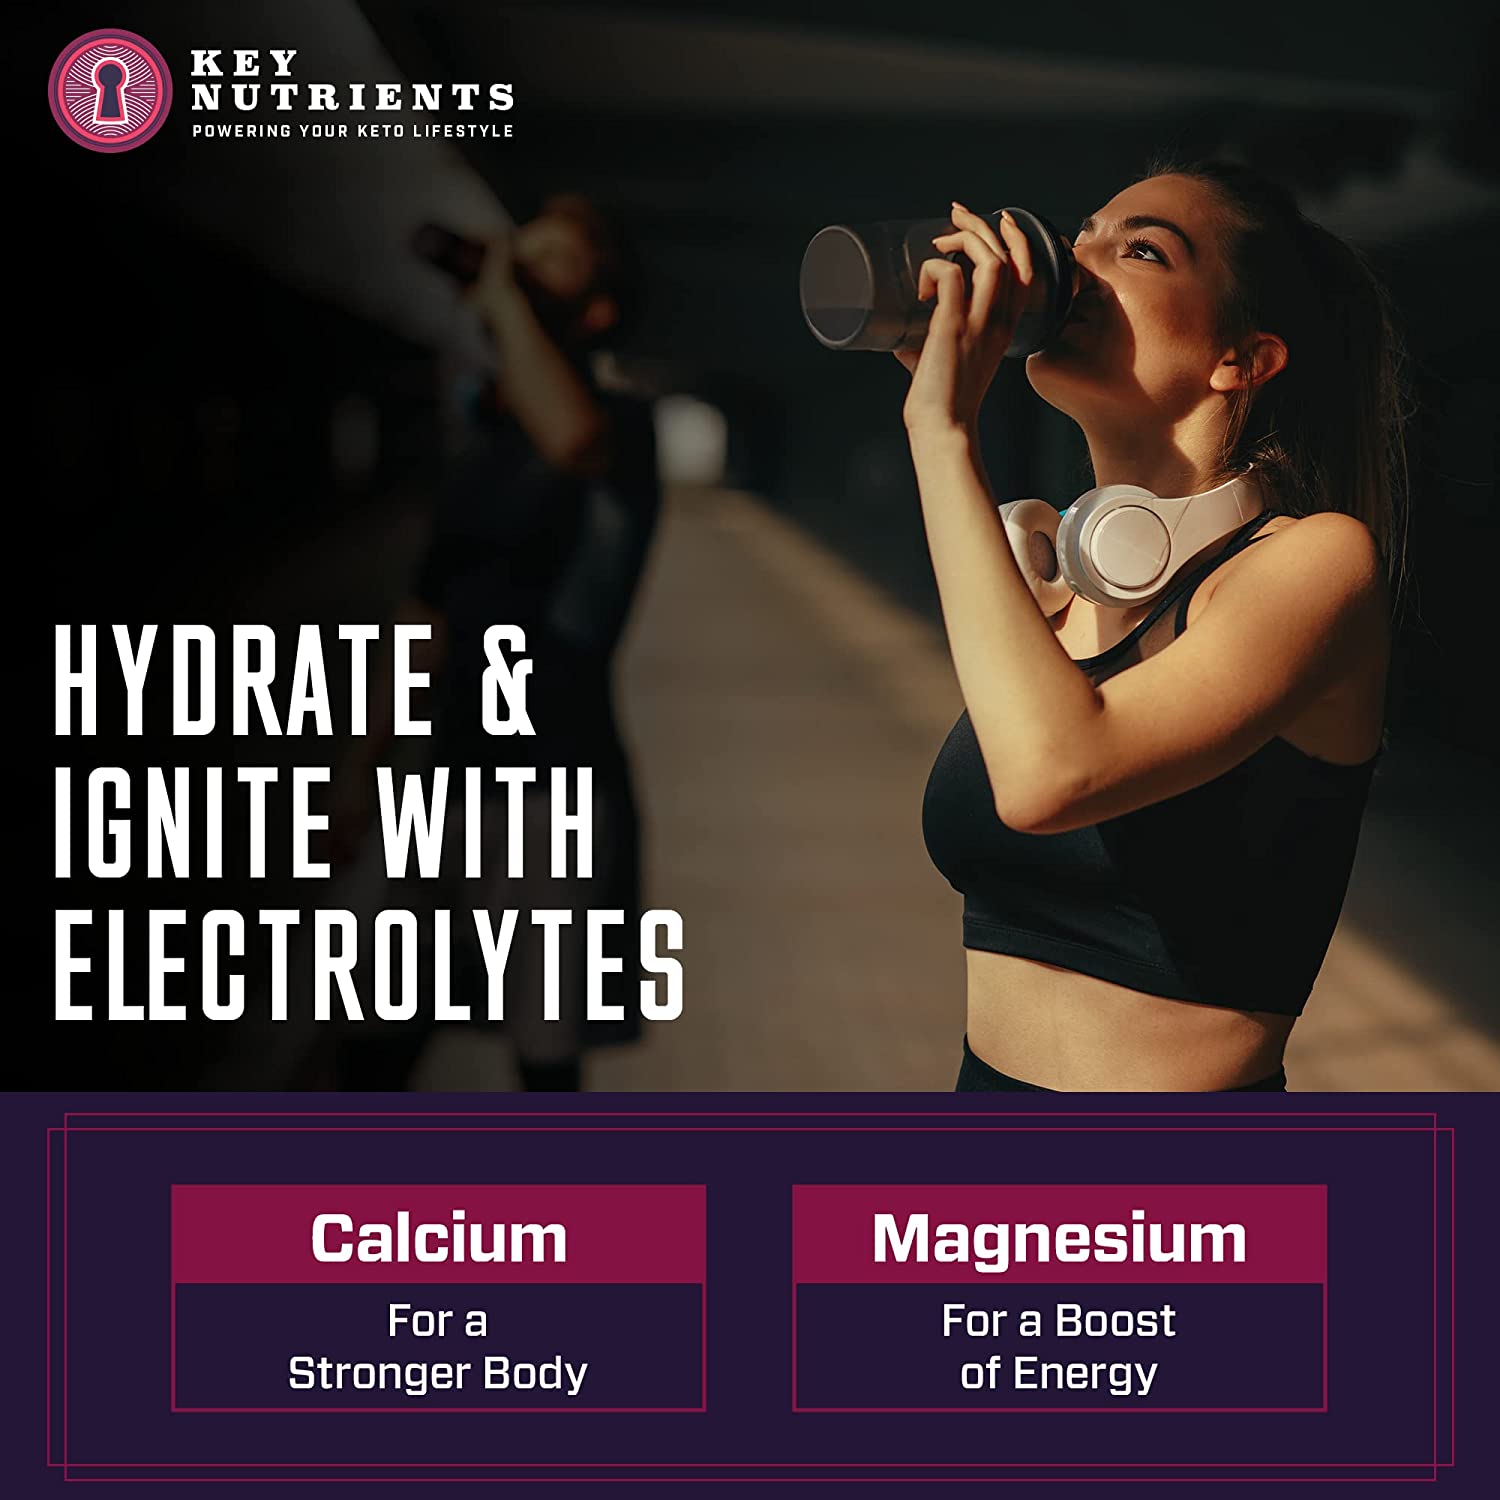 Calcium & magnesium content of Post Workout BCAA Powder w/ Electrolytes